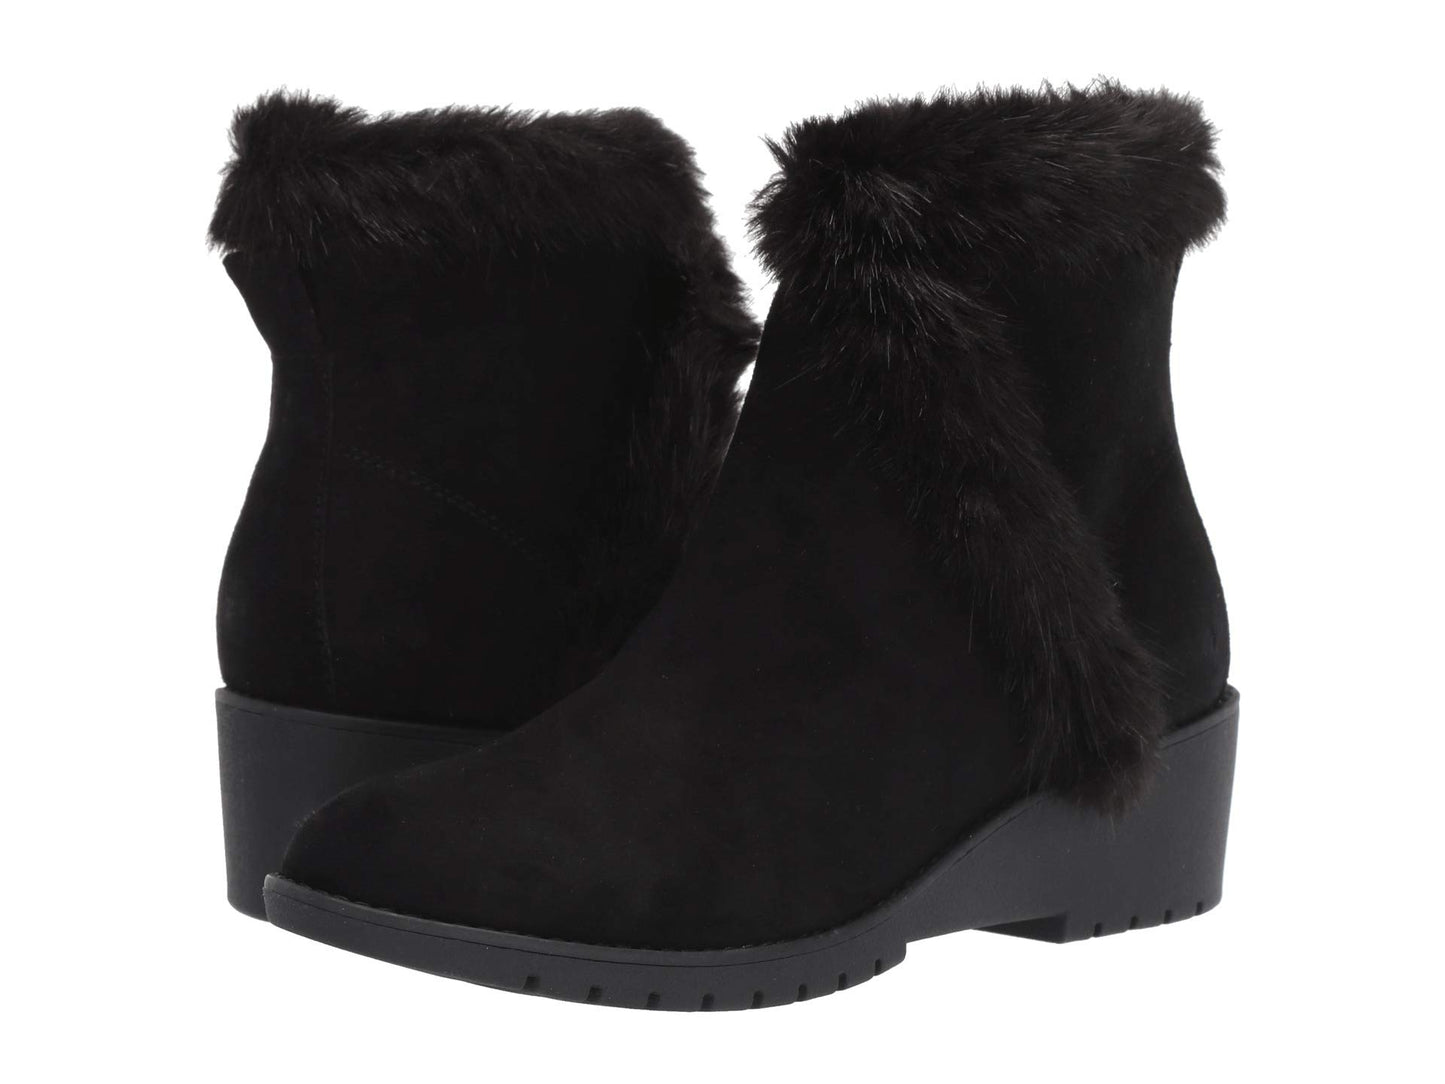 Noble Black Suede Me Too Ankle Boots